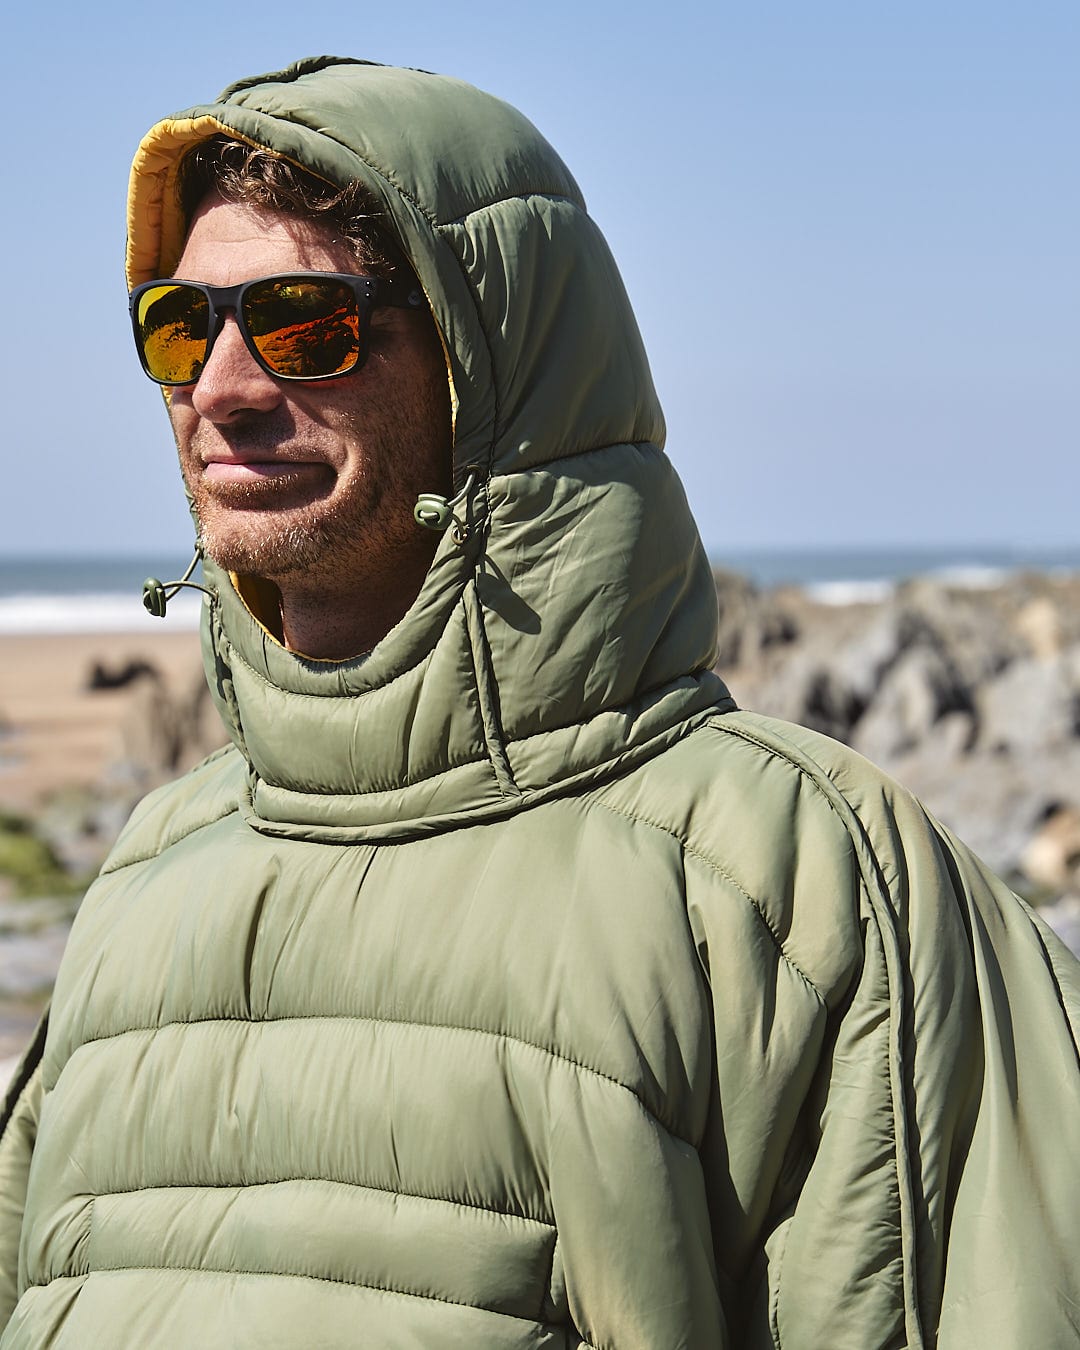 A man in a Saltrock green puffy jacket standing on the beach.